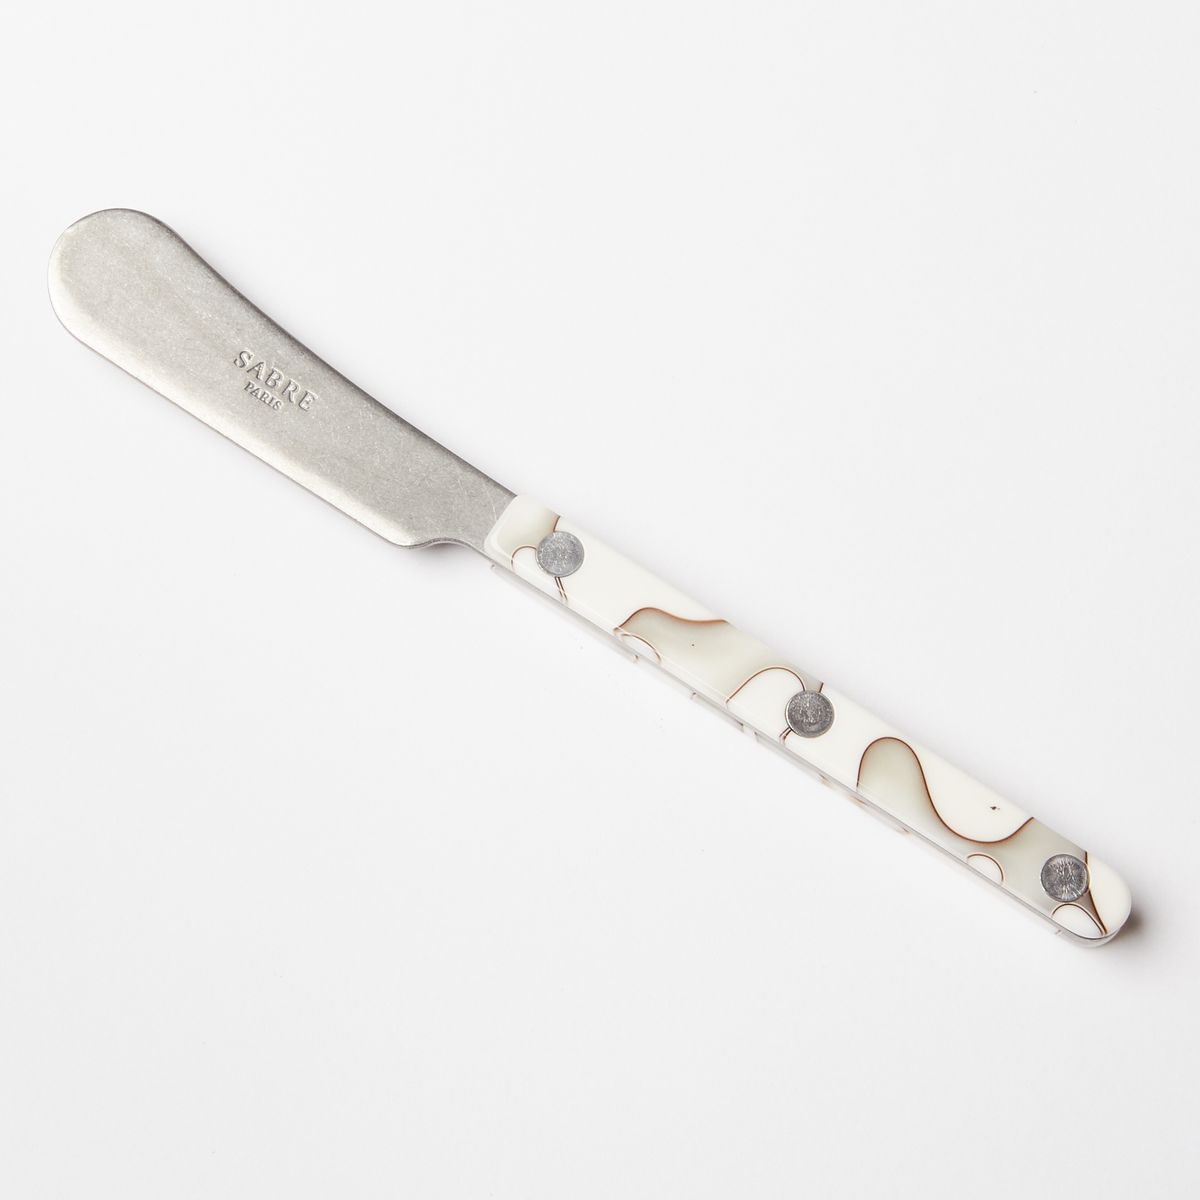 A butter knife with a stainless steel blade and an acrylic white and grey handle